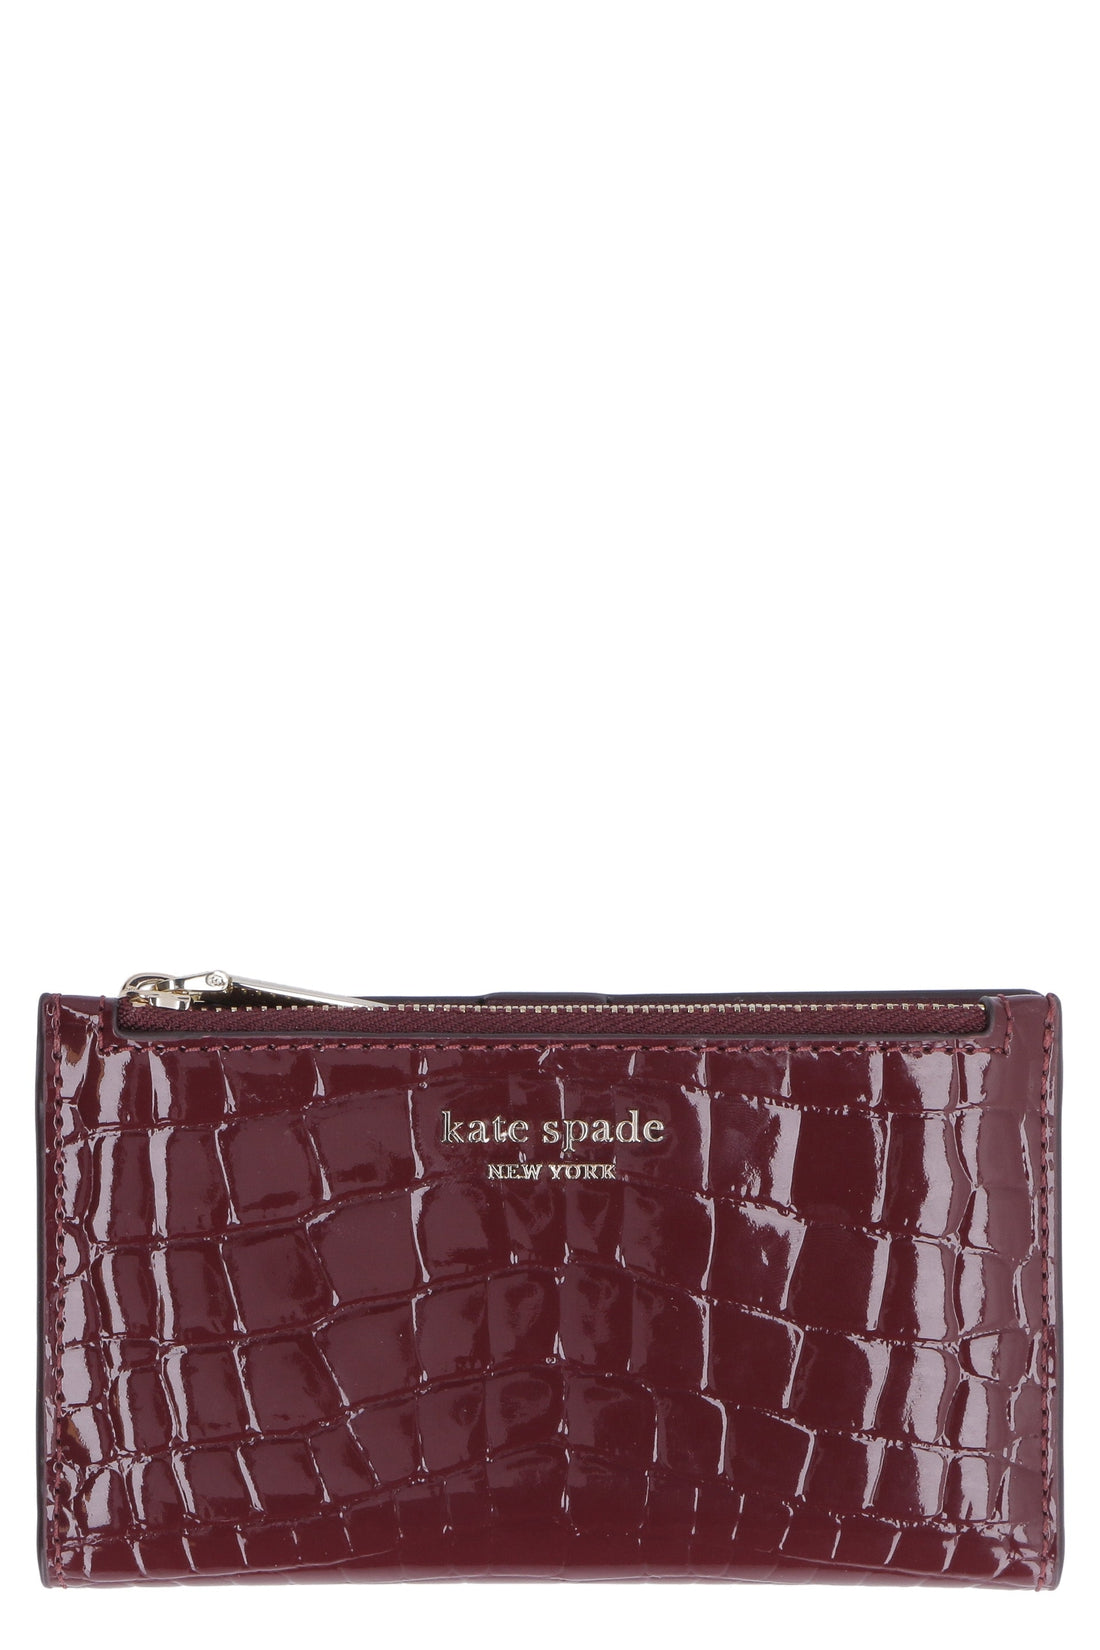 Kate Spade New York-OUTLET-SALE-Sylvia logo leather wallet-ARCHIVIST